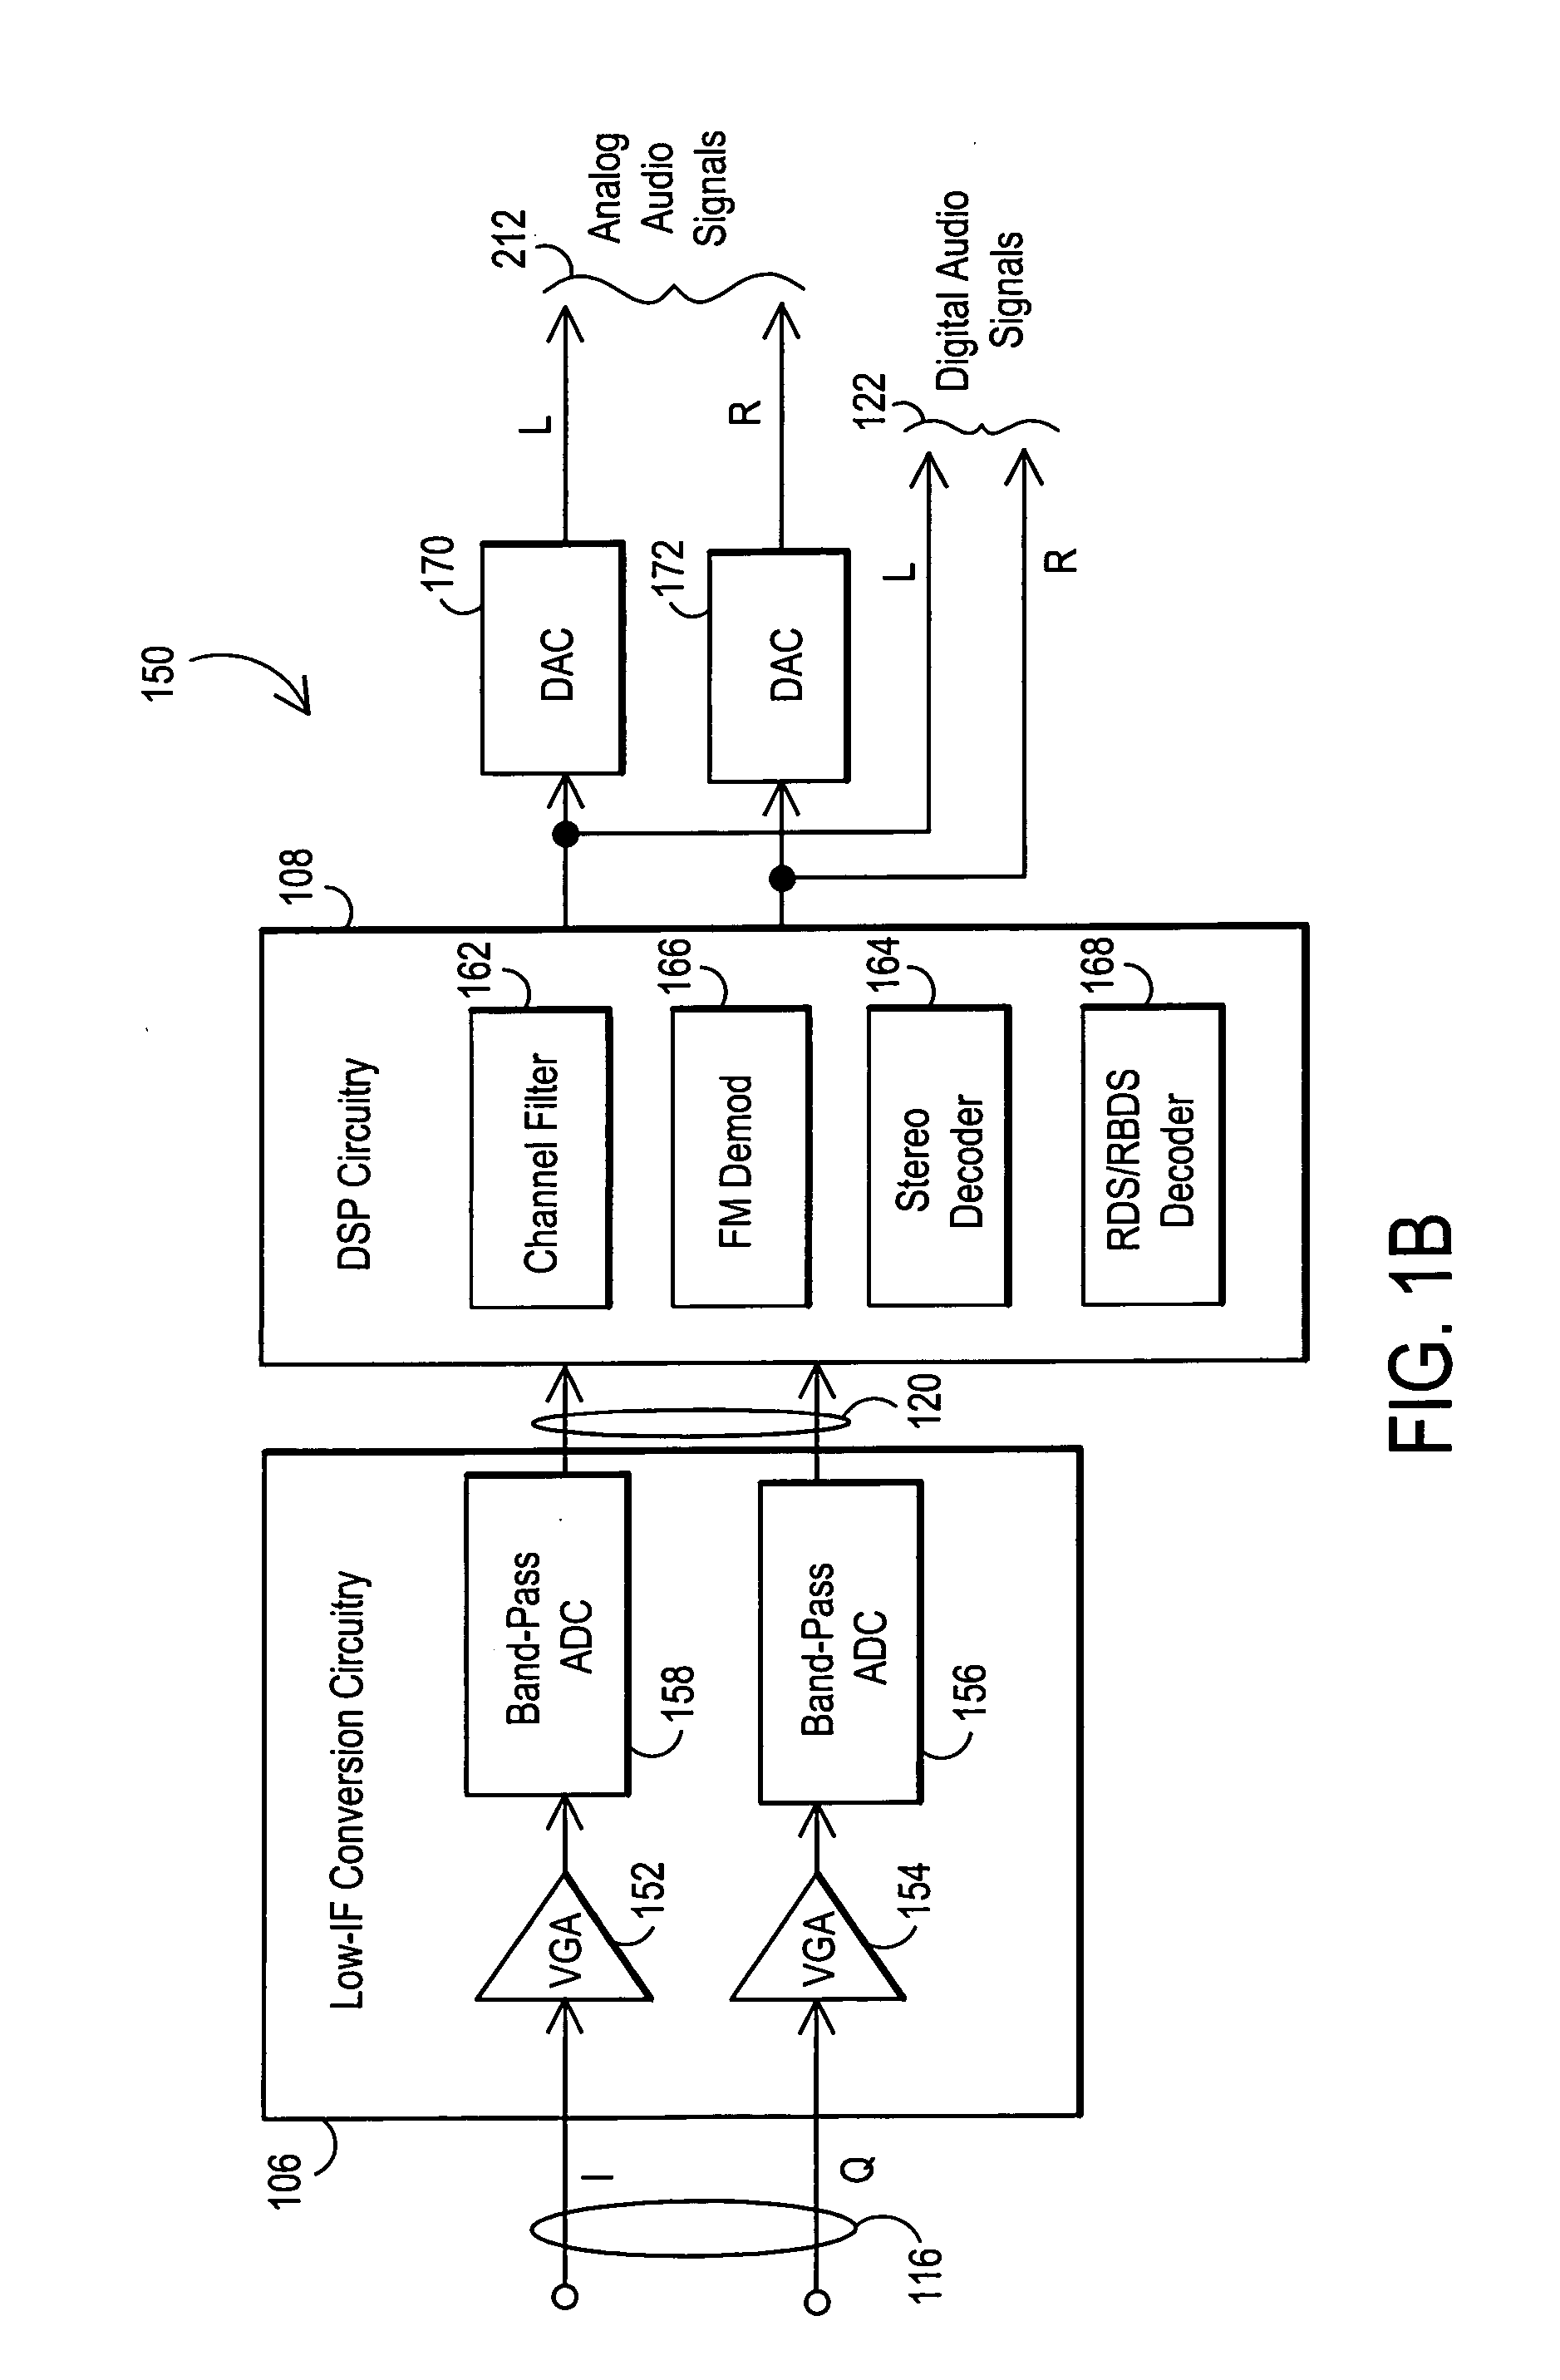 Integrated low-IF terrestrial audio broadcast receiver and associated method